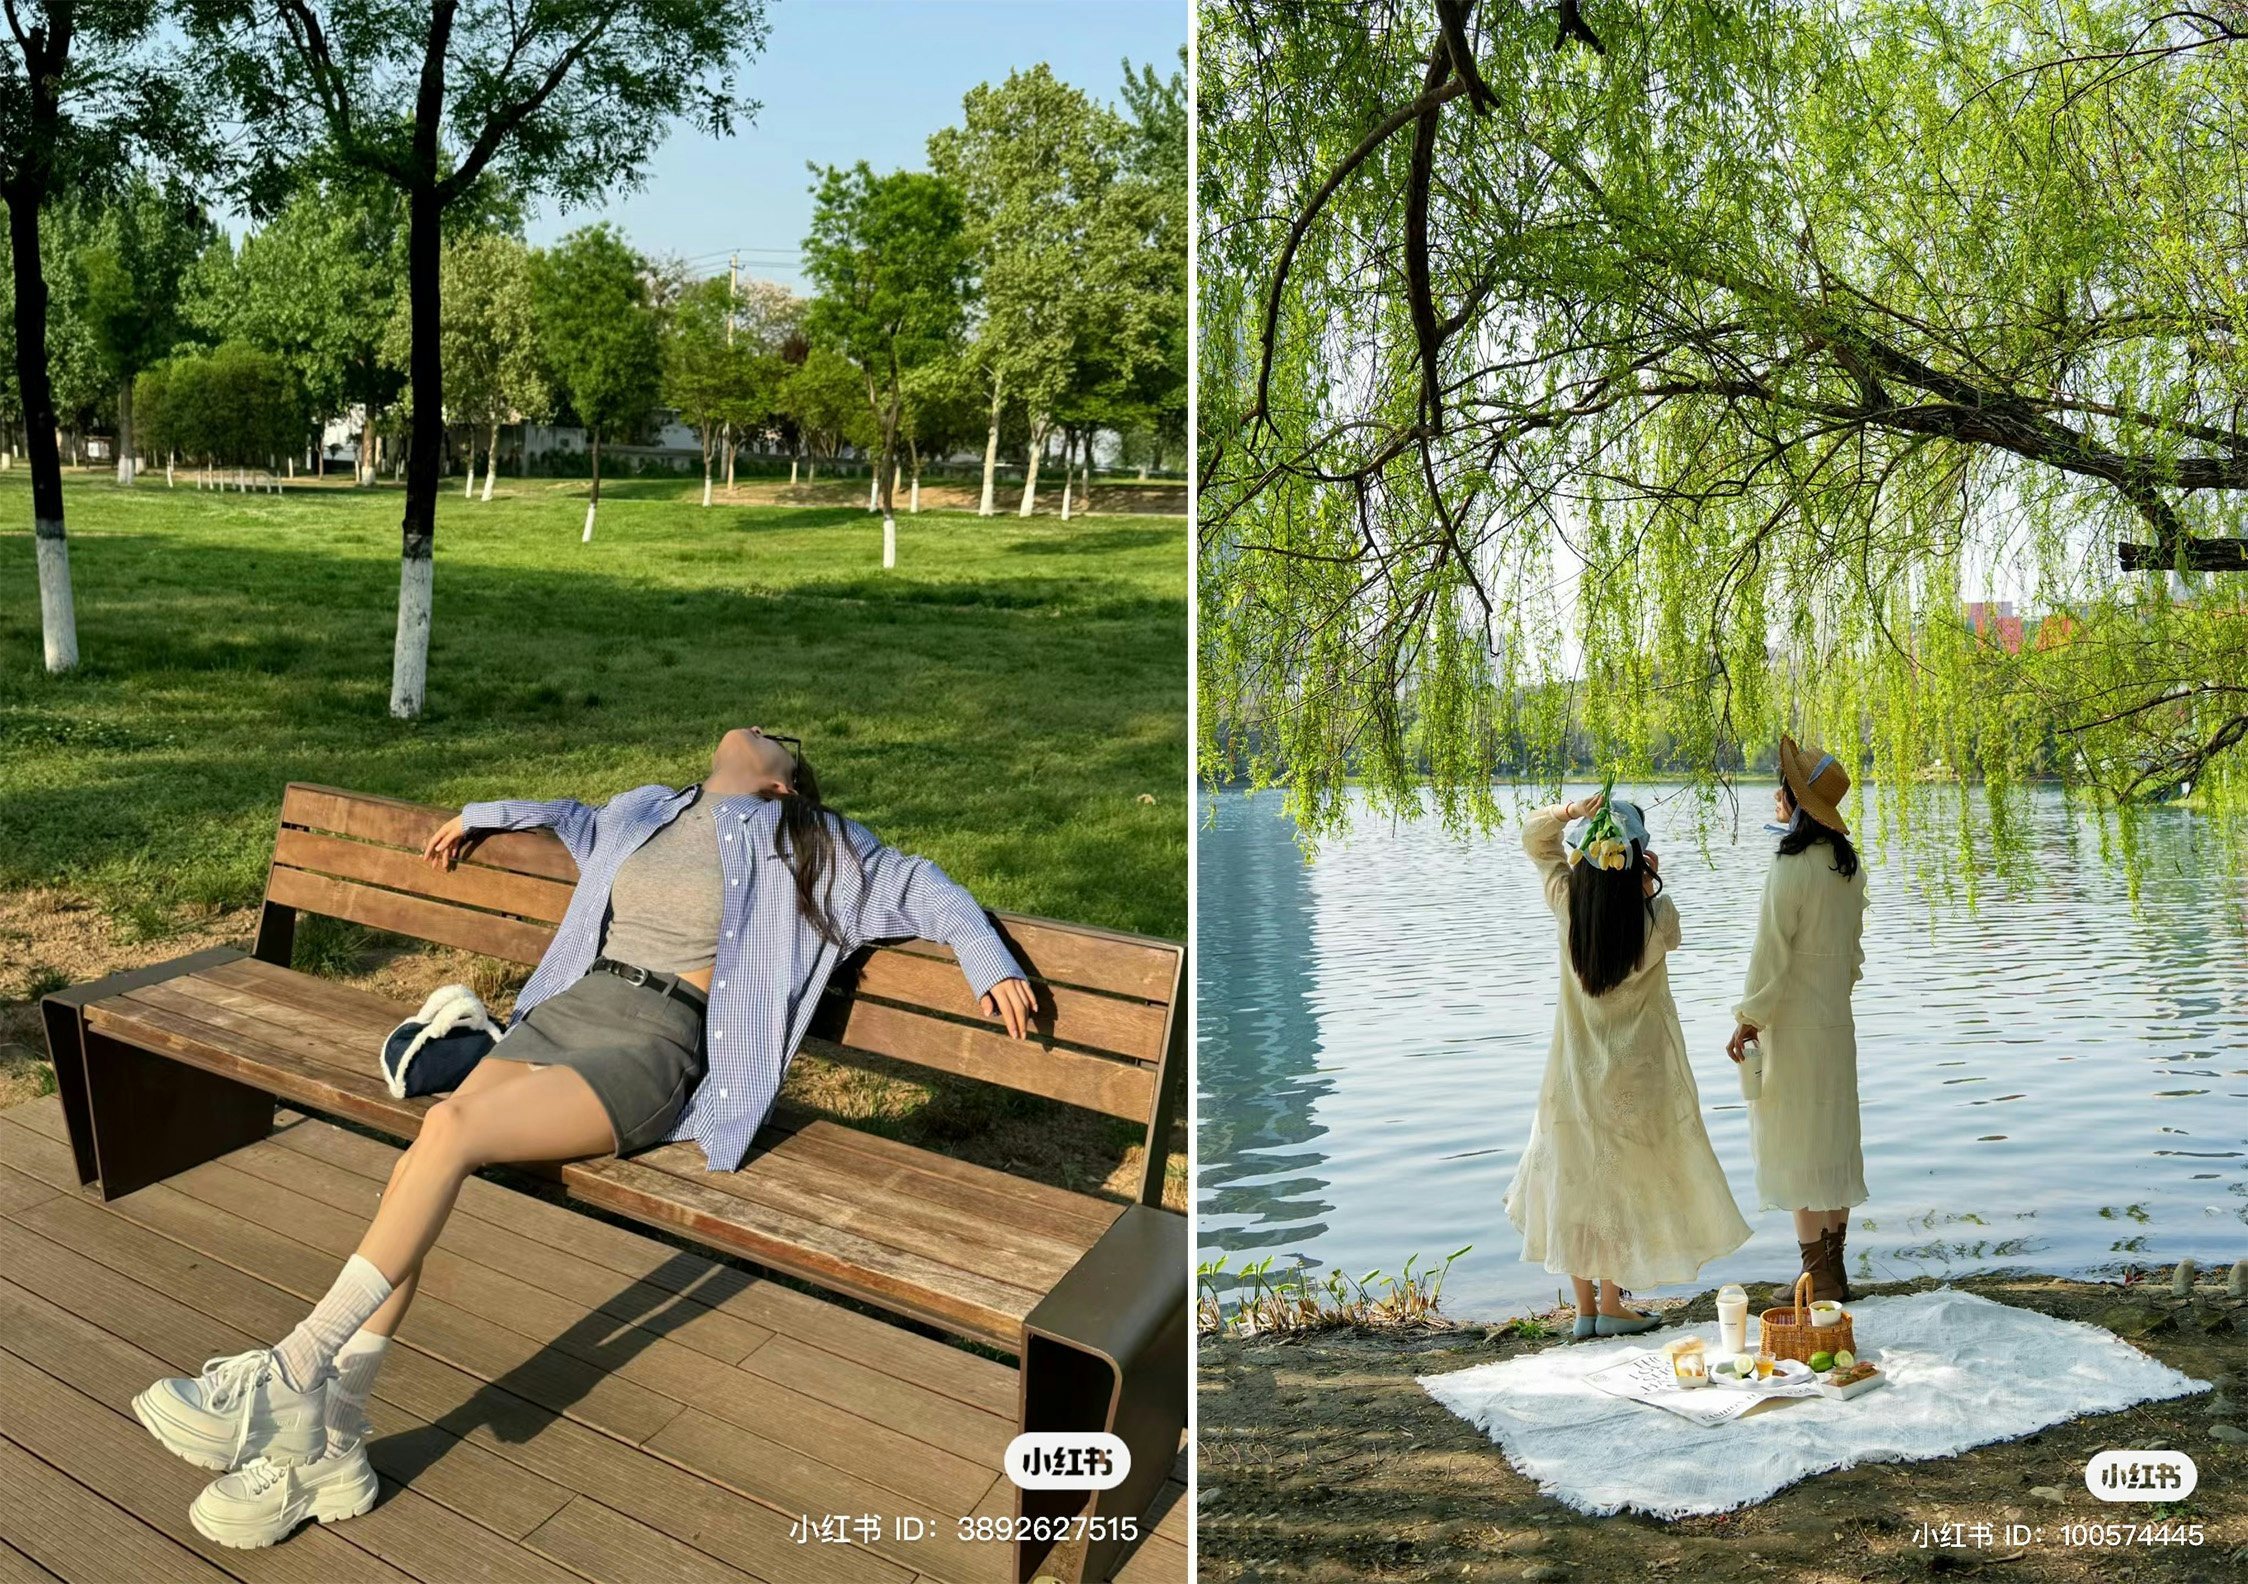 Chinese youth are finding peace in parks. Image: Xiaohongshu